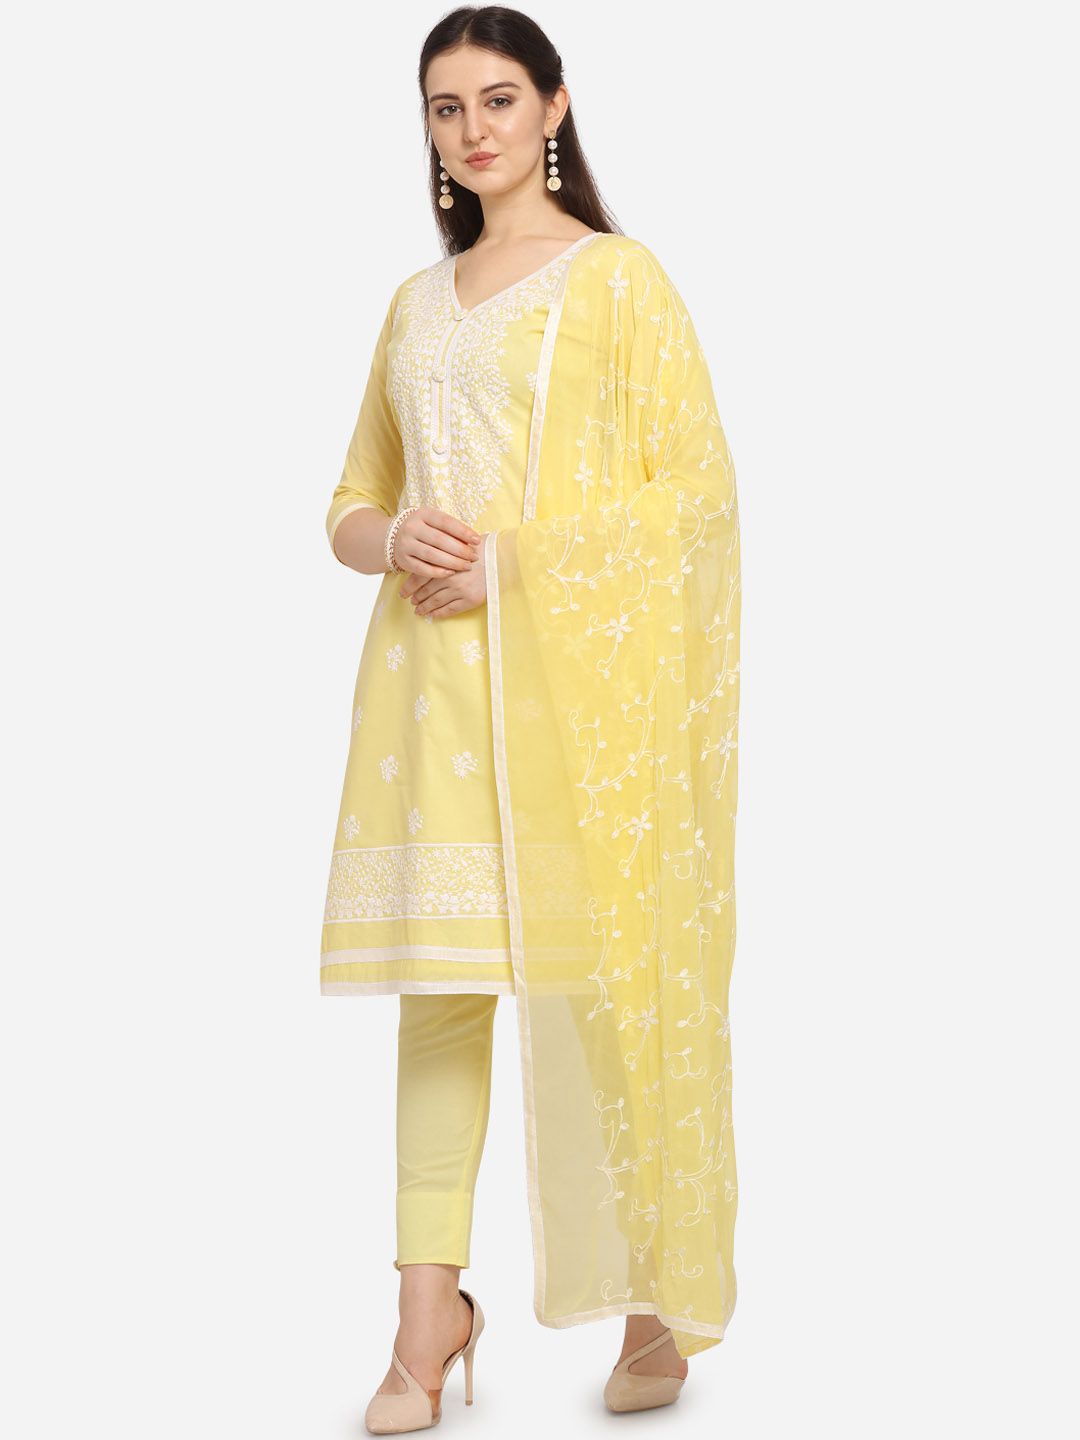 Ethnic Junction Women Yellow & White Embroidered Unstitched Dress Material Price in India